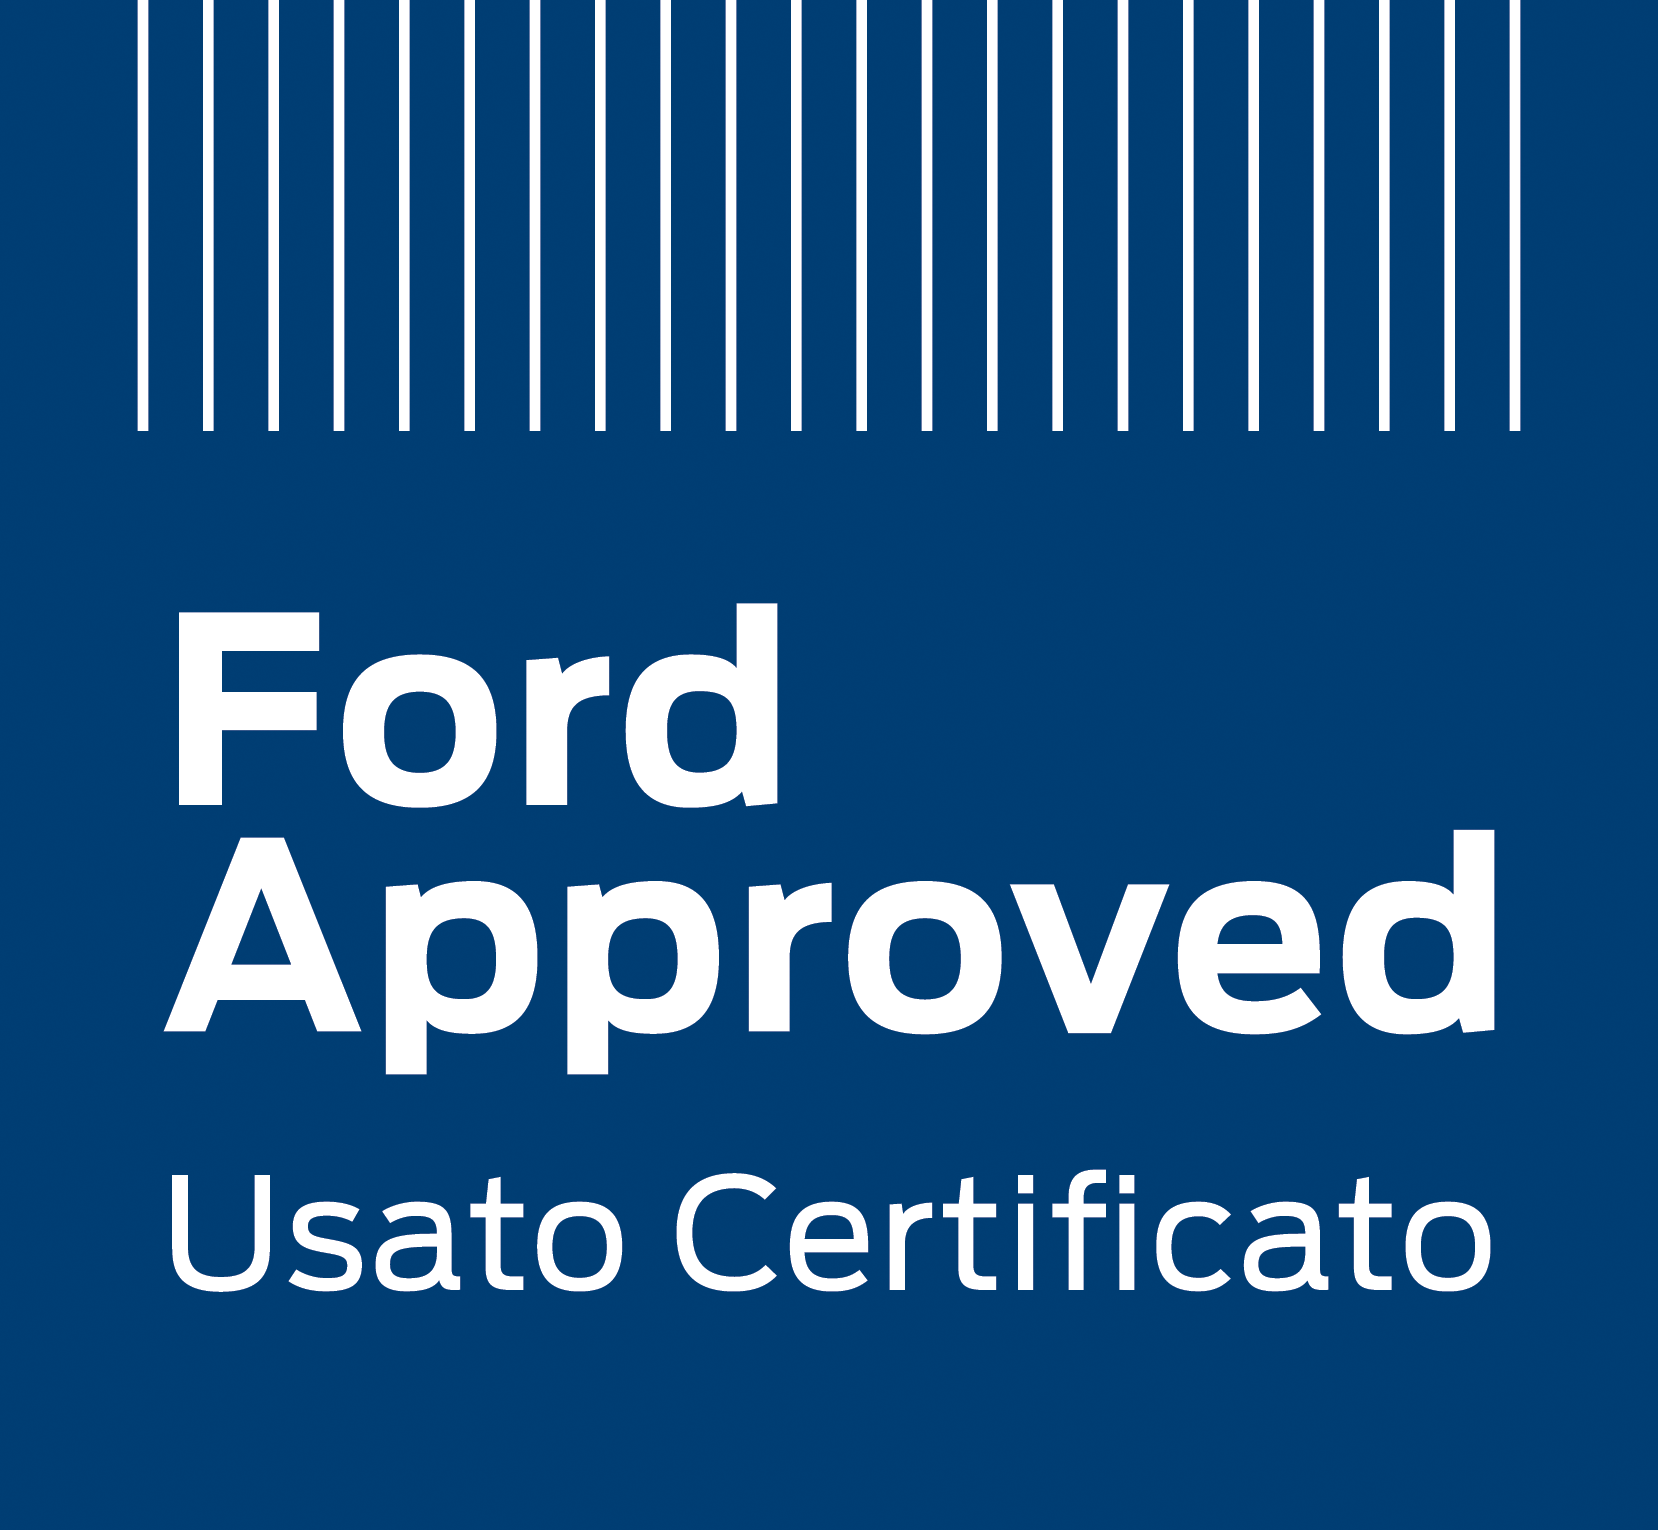 Ford Approved Usato Certificato